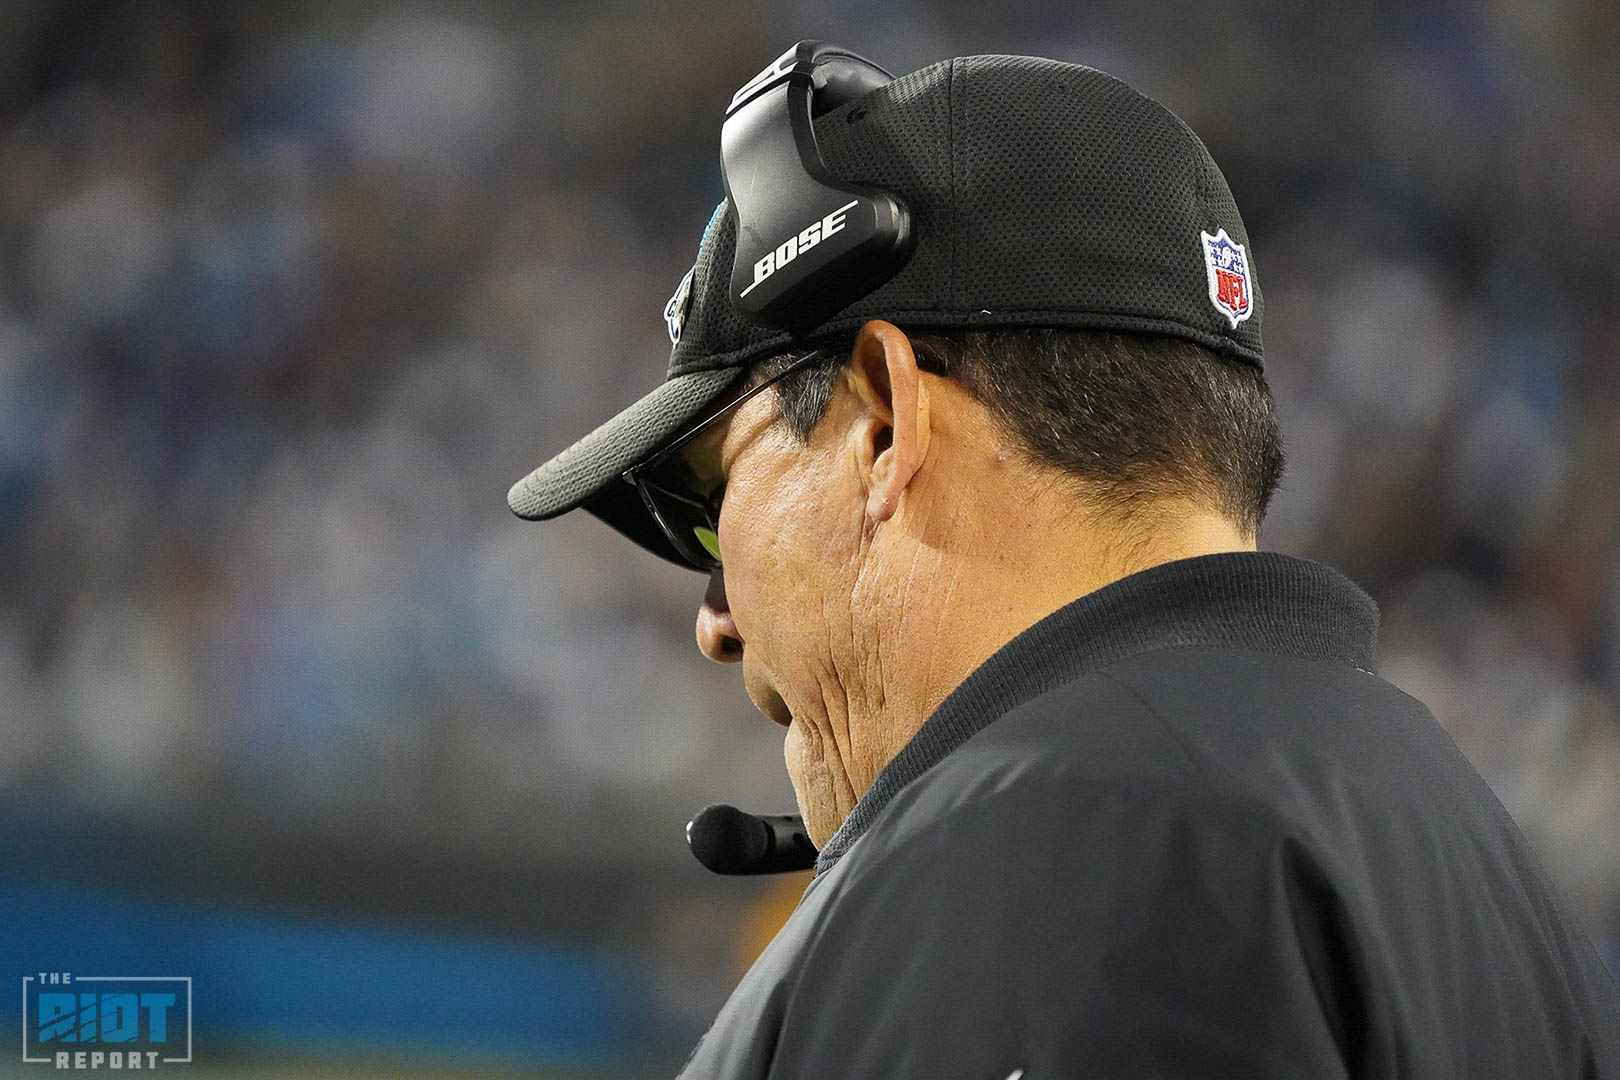 Questions About Ron Rivera, Cam Newton and Others Surround Panthers